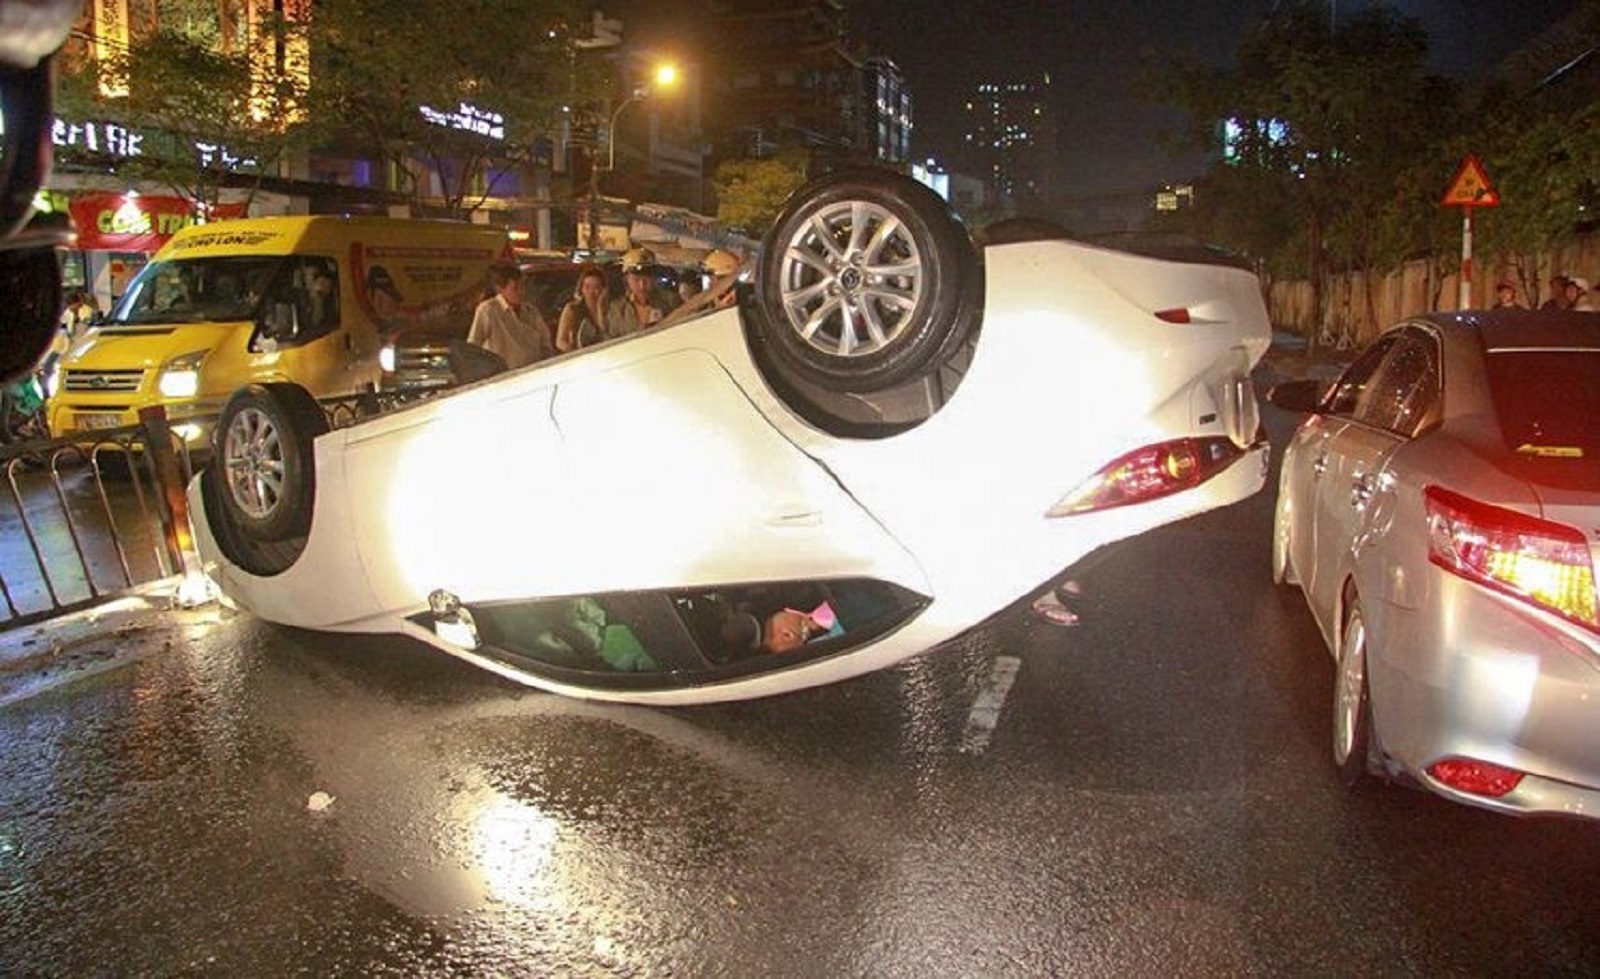 The reason why the car is prone to tipping and how to avoid it - Photo 1.